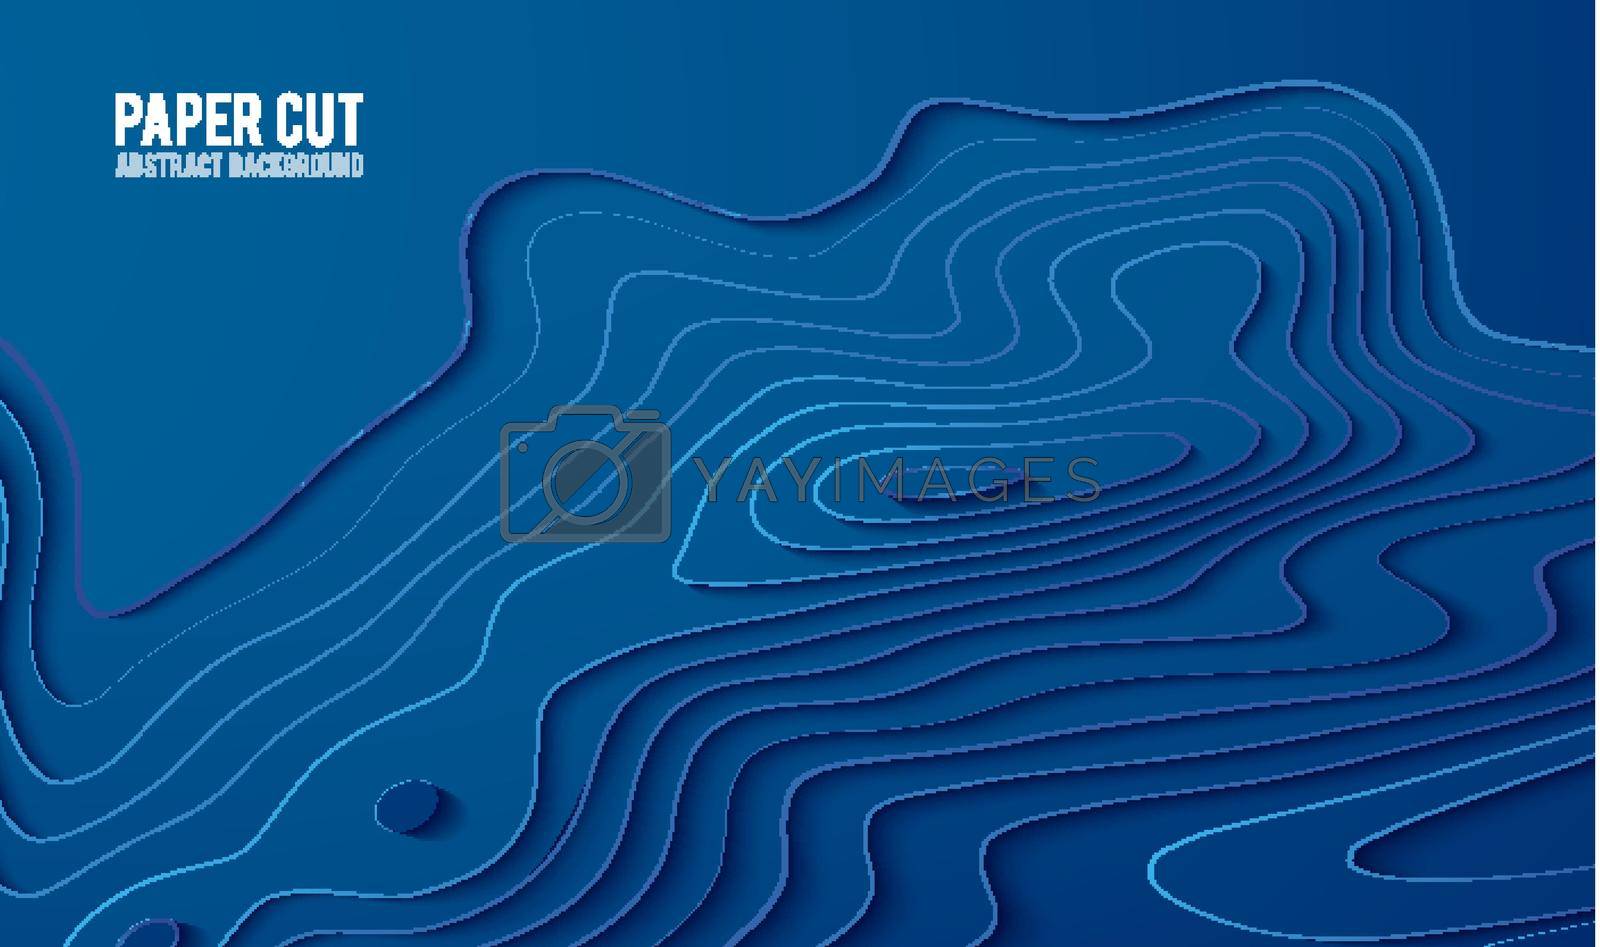 Paper cut banner concept. Paper carve blue gradient for card poster brochure flyer design in blue colors. 3d abstract